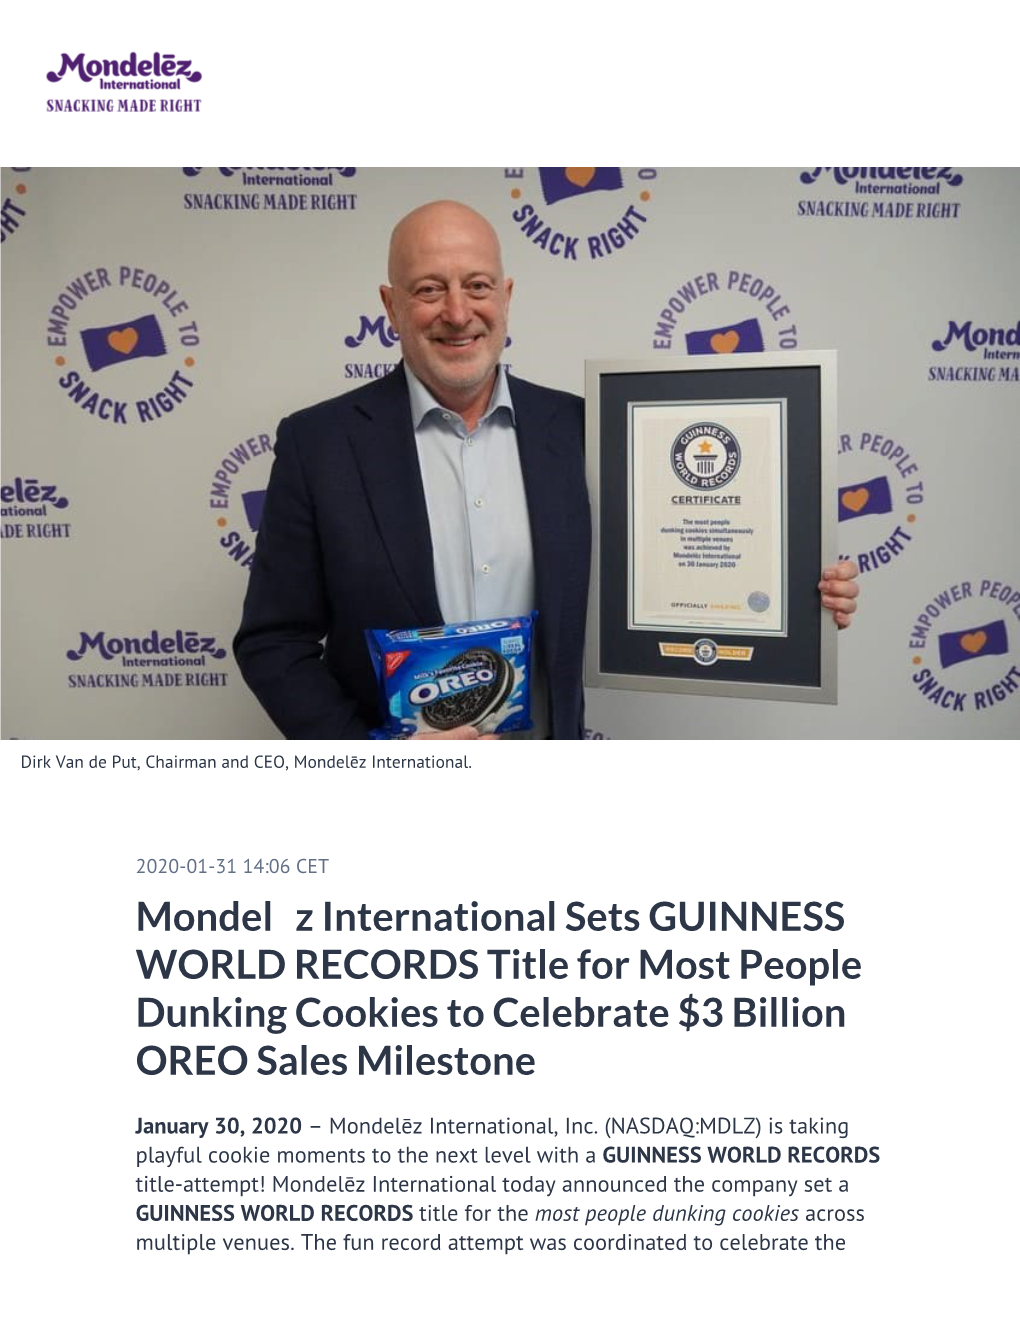 Mondelēz International Sets GUINNESS WORLD RECORDS Title for Most People Dunking Cookies to Celebrate $3 Billion OREO Sales Milestone